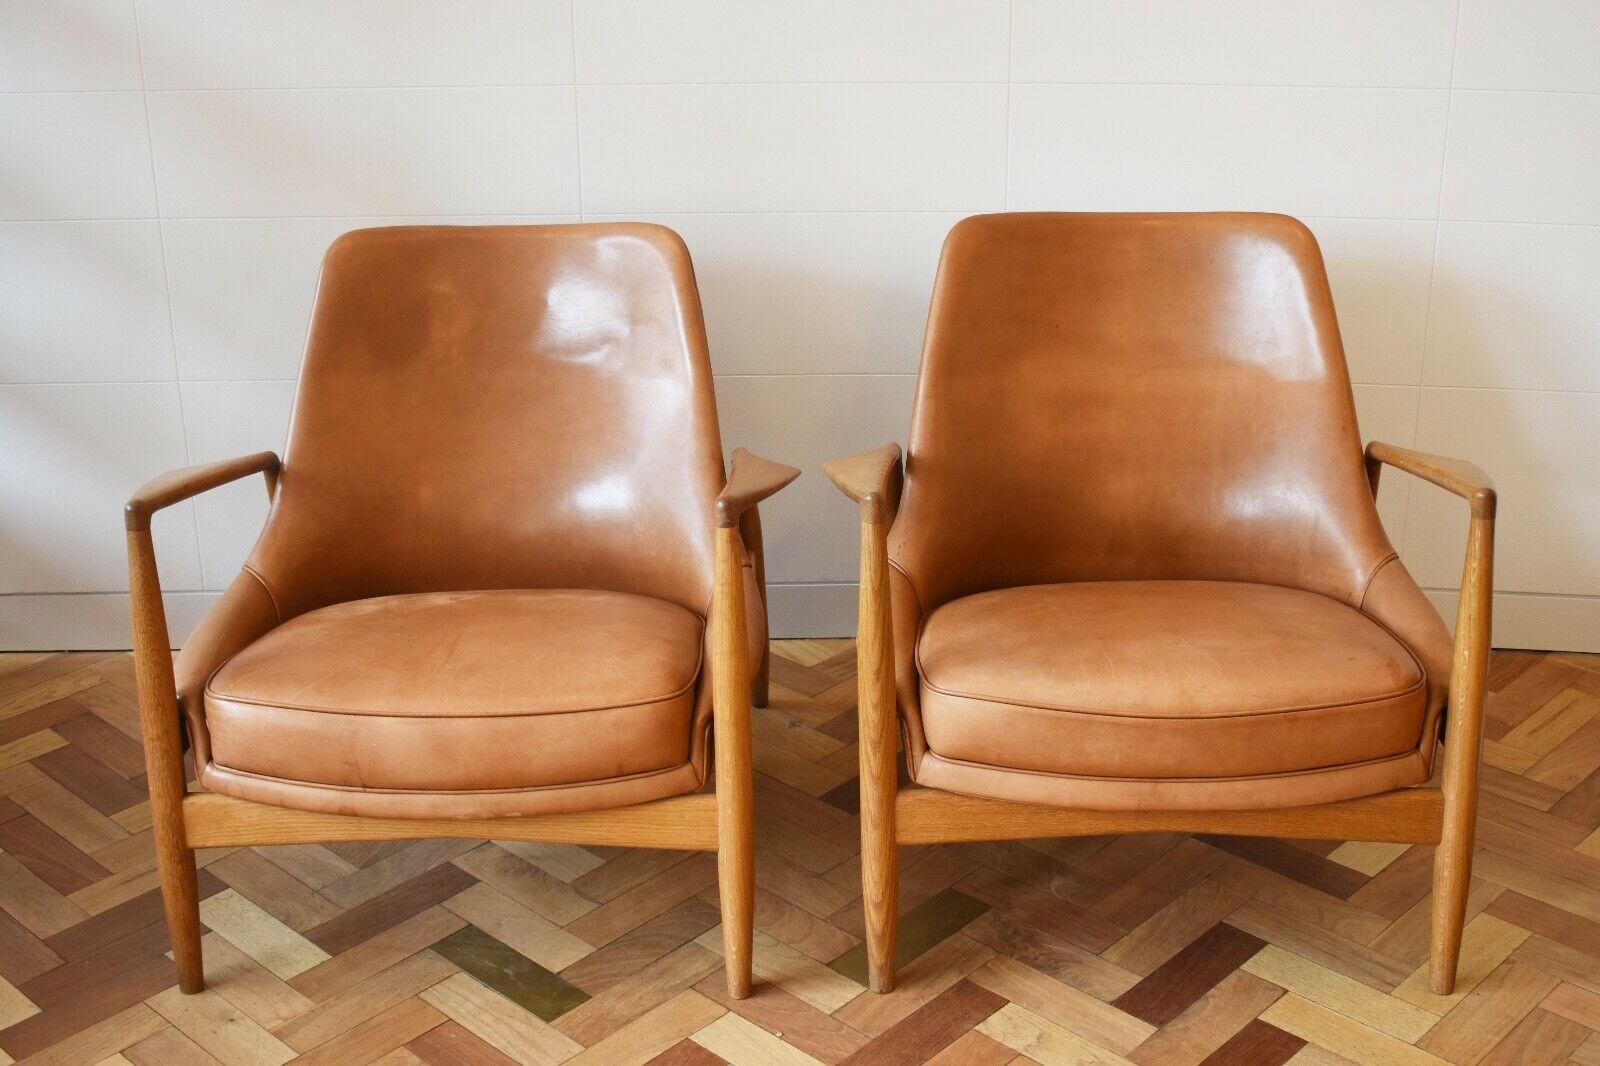 Contemporary Pair of ‘Seal’ Lounge Chairs Produced by Ib Kofod-Larsen for Brdr Petersens